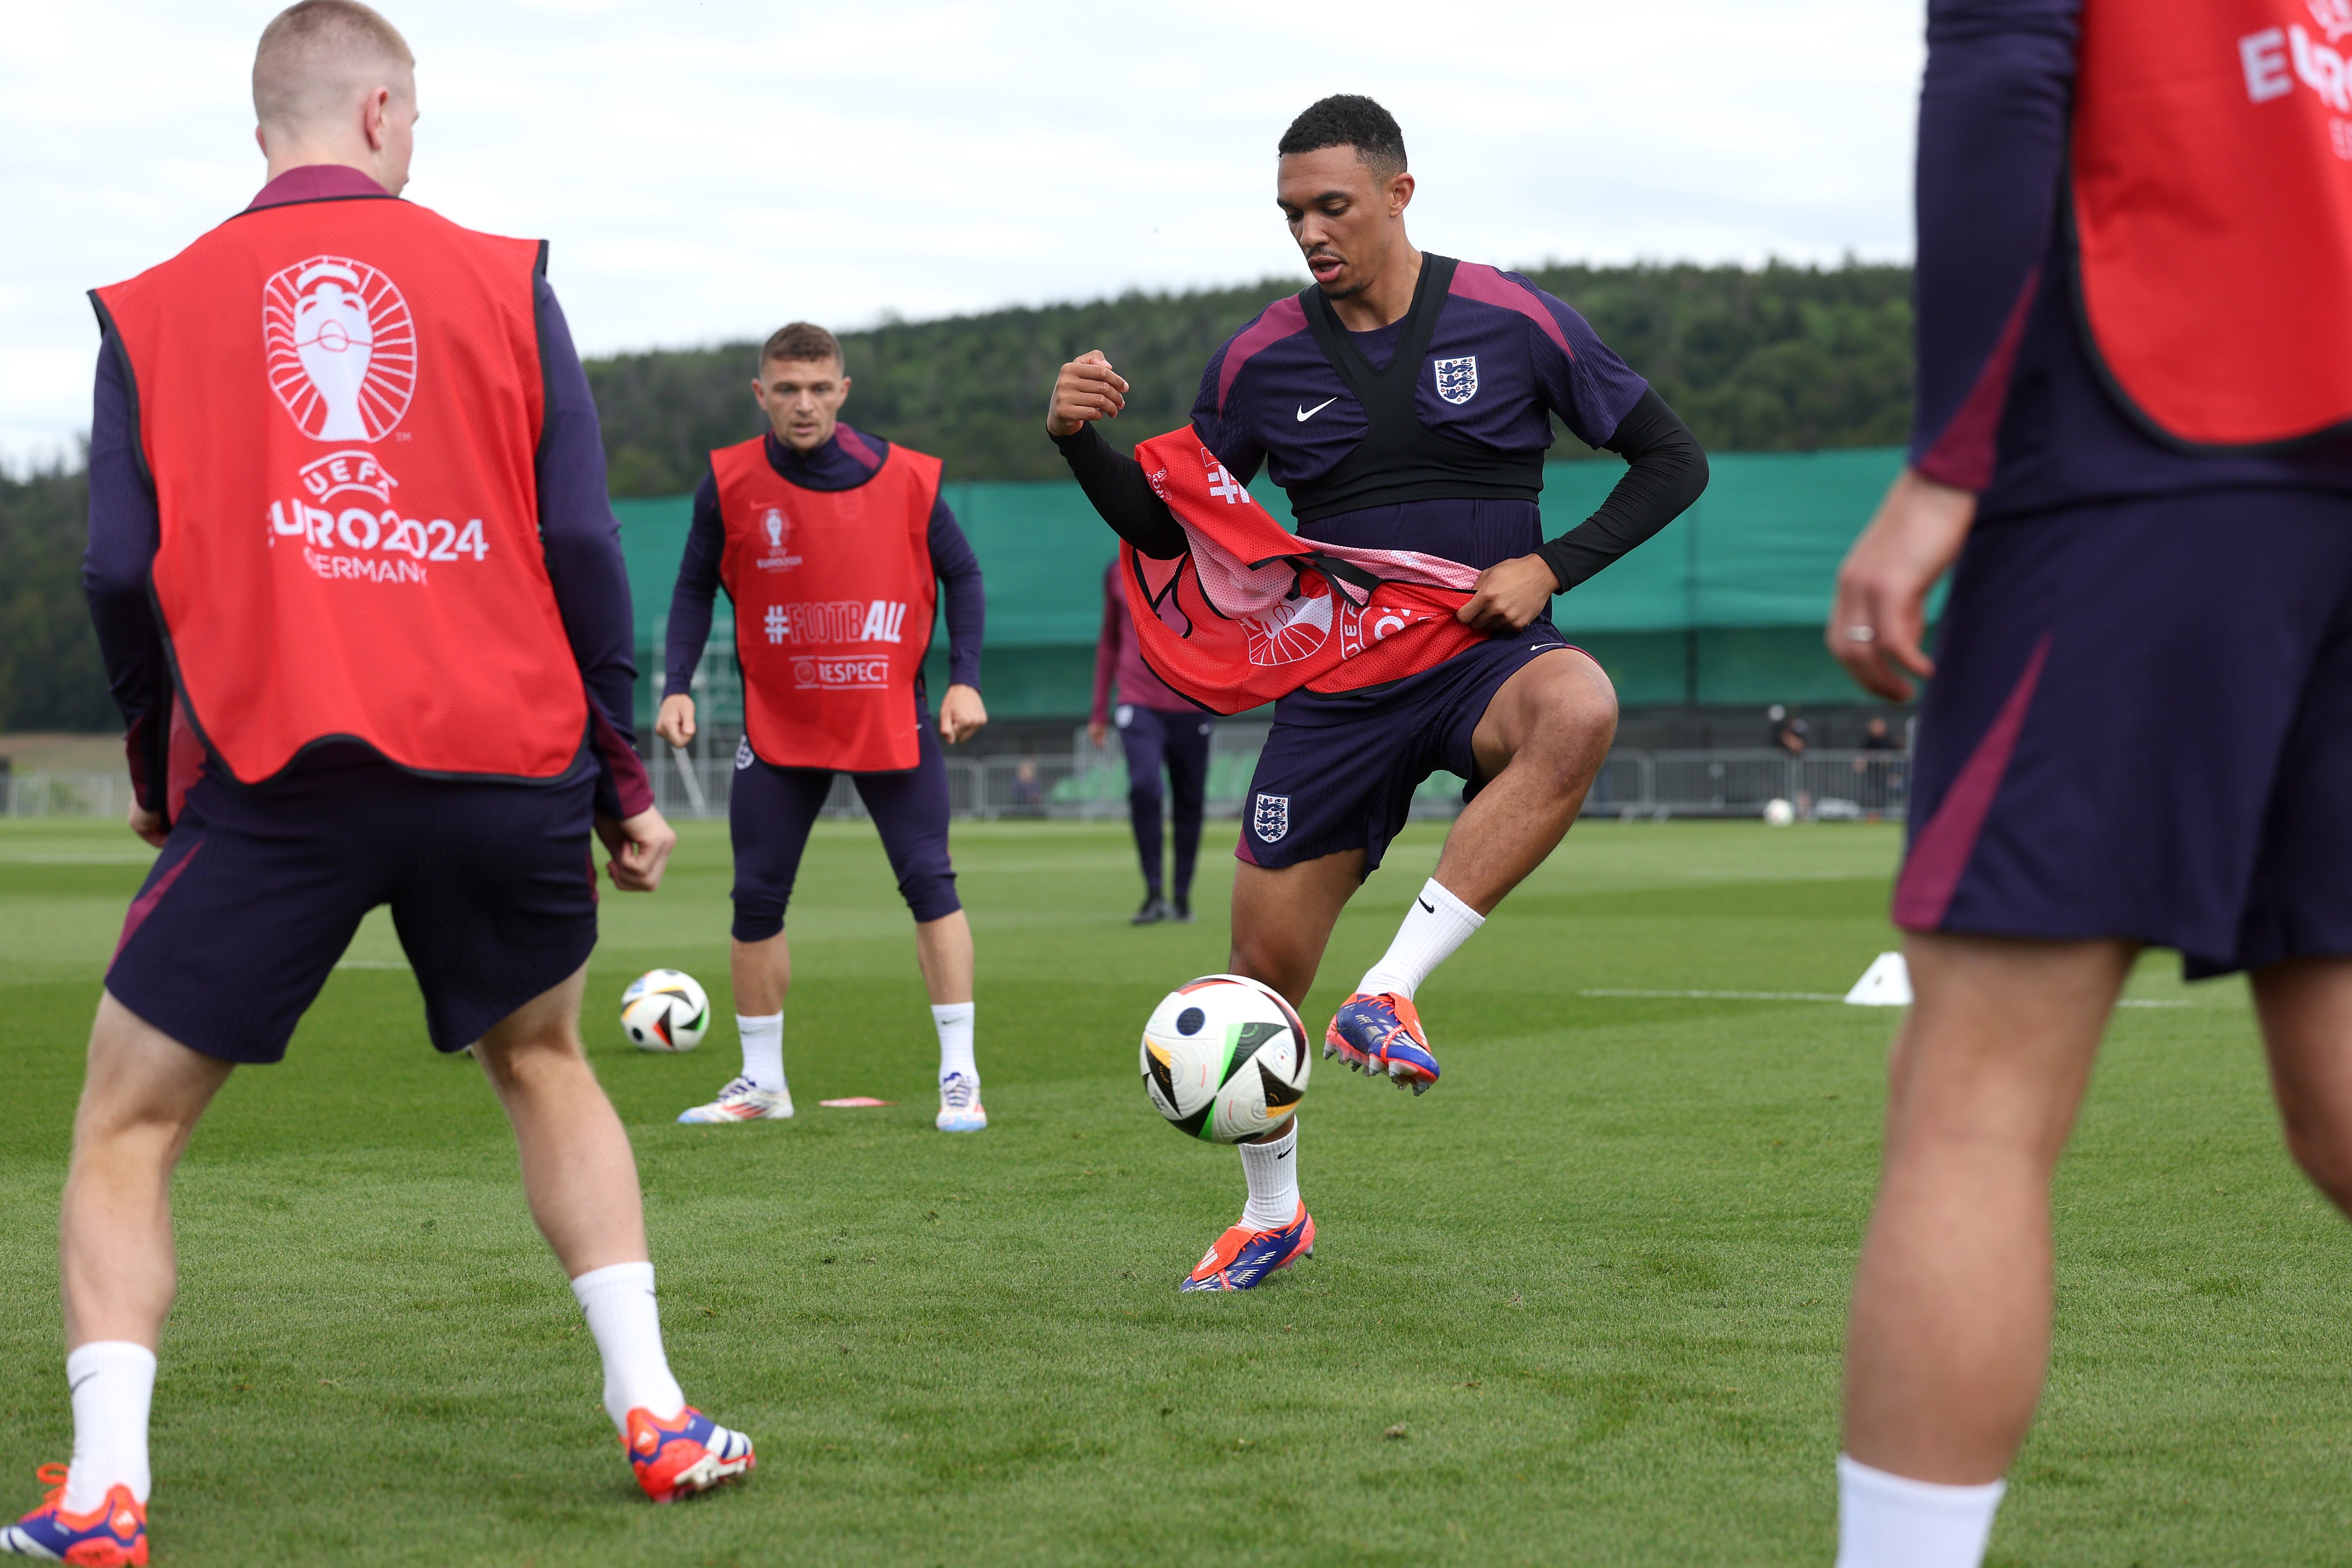 Alexander-Arnold controls the ball during Saturday’s training session